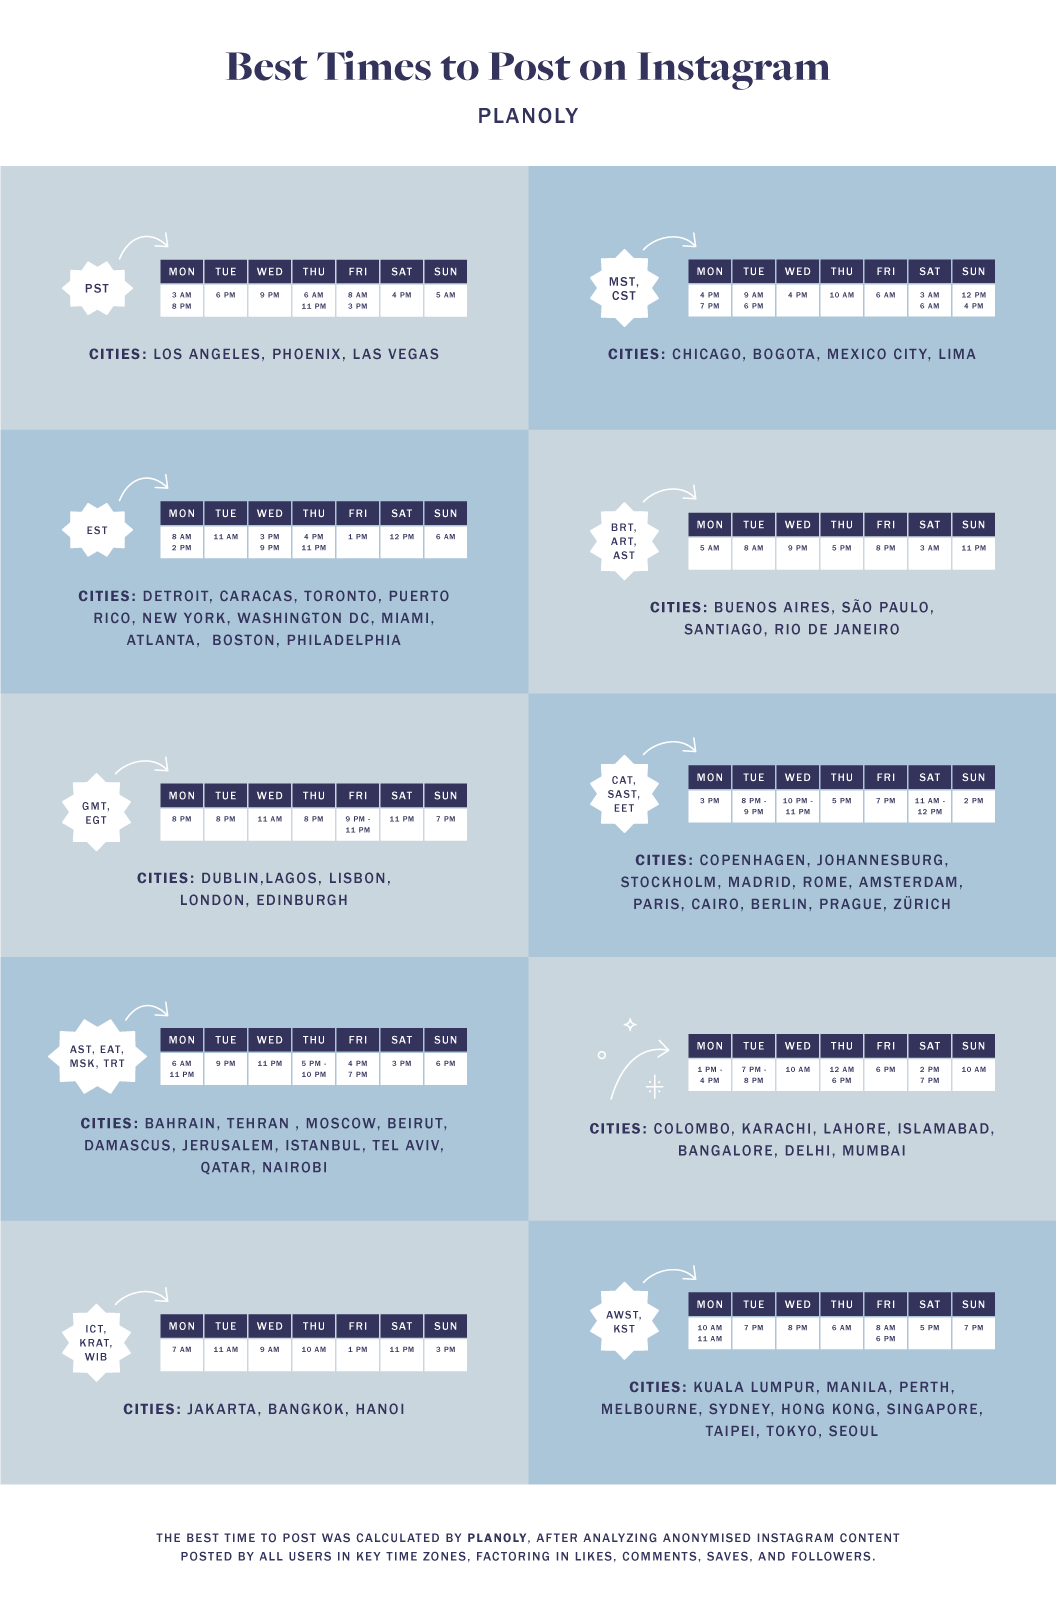 PLANOLY---Best-Times-to-Post---Infographic